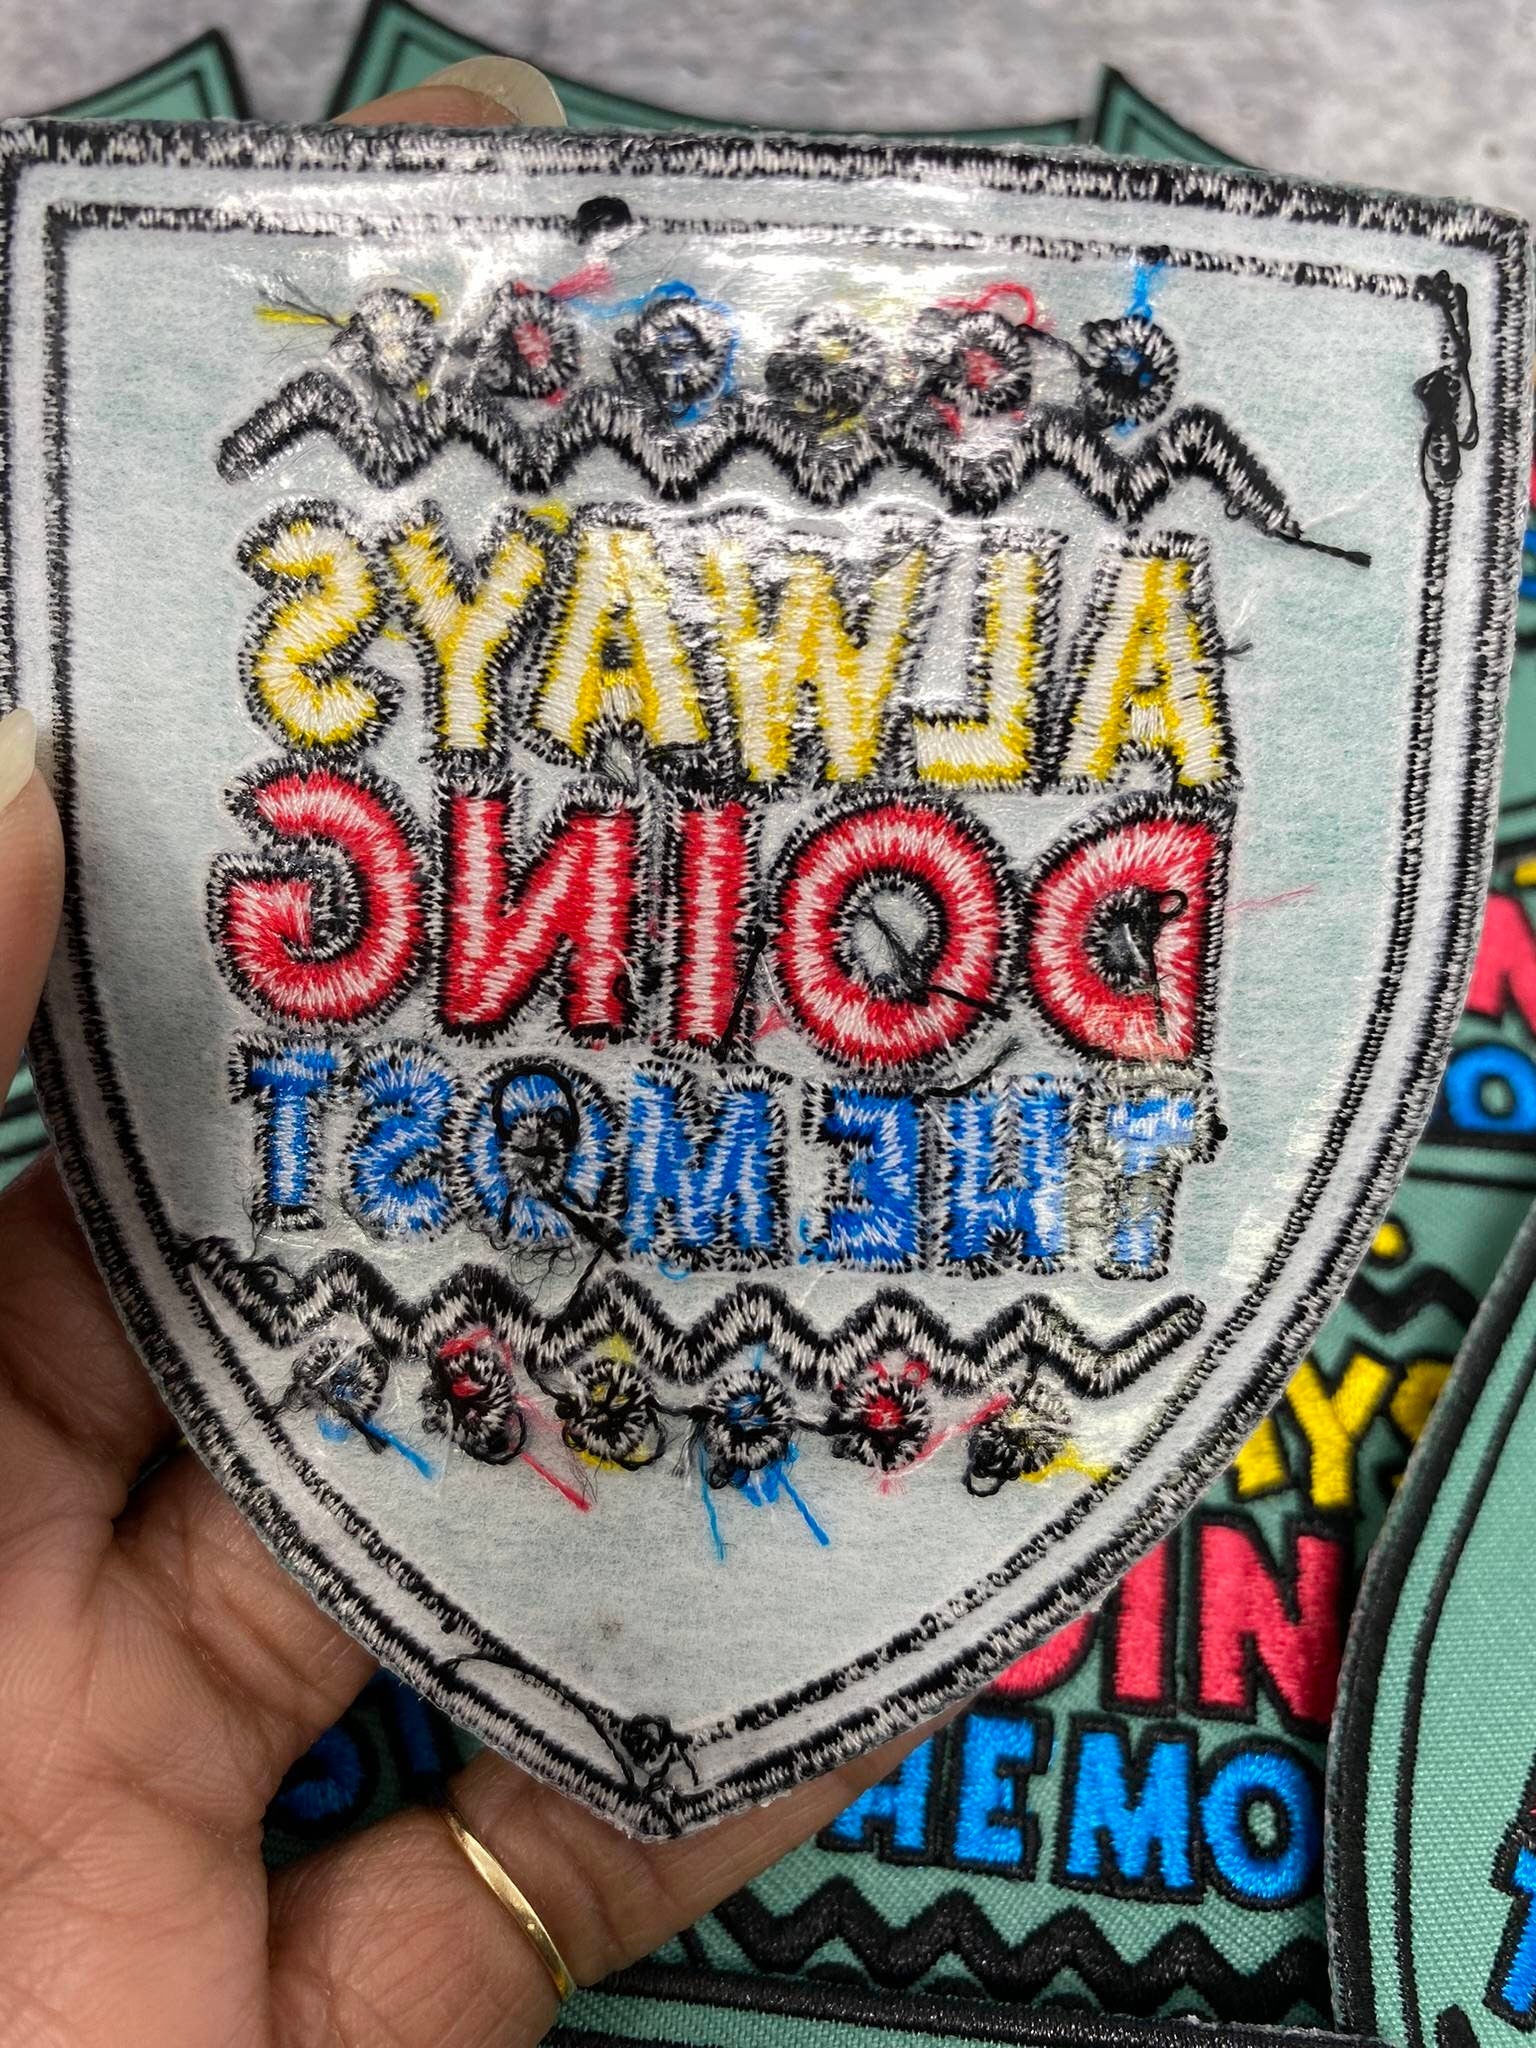 Cute Statement Patch, 1-pc "Always Doing the Most" Size 4", DIY Applique, Iron-On Embroidered Patch, Hotfix Patch for Hats, Crocs, Clothing